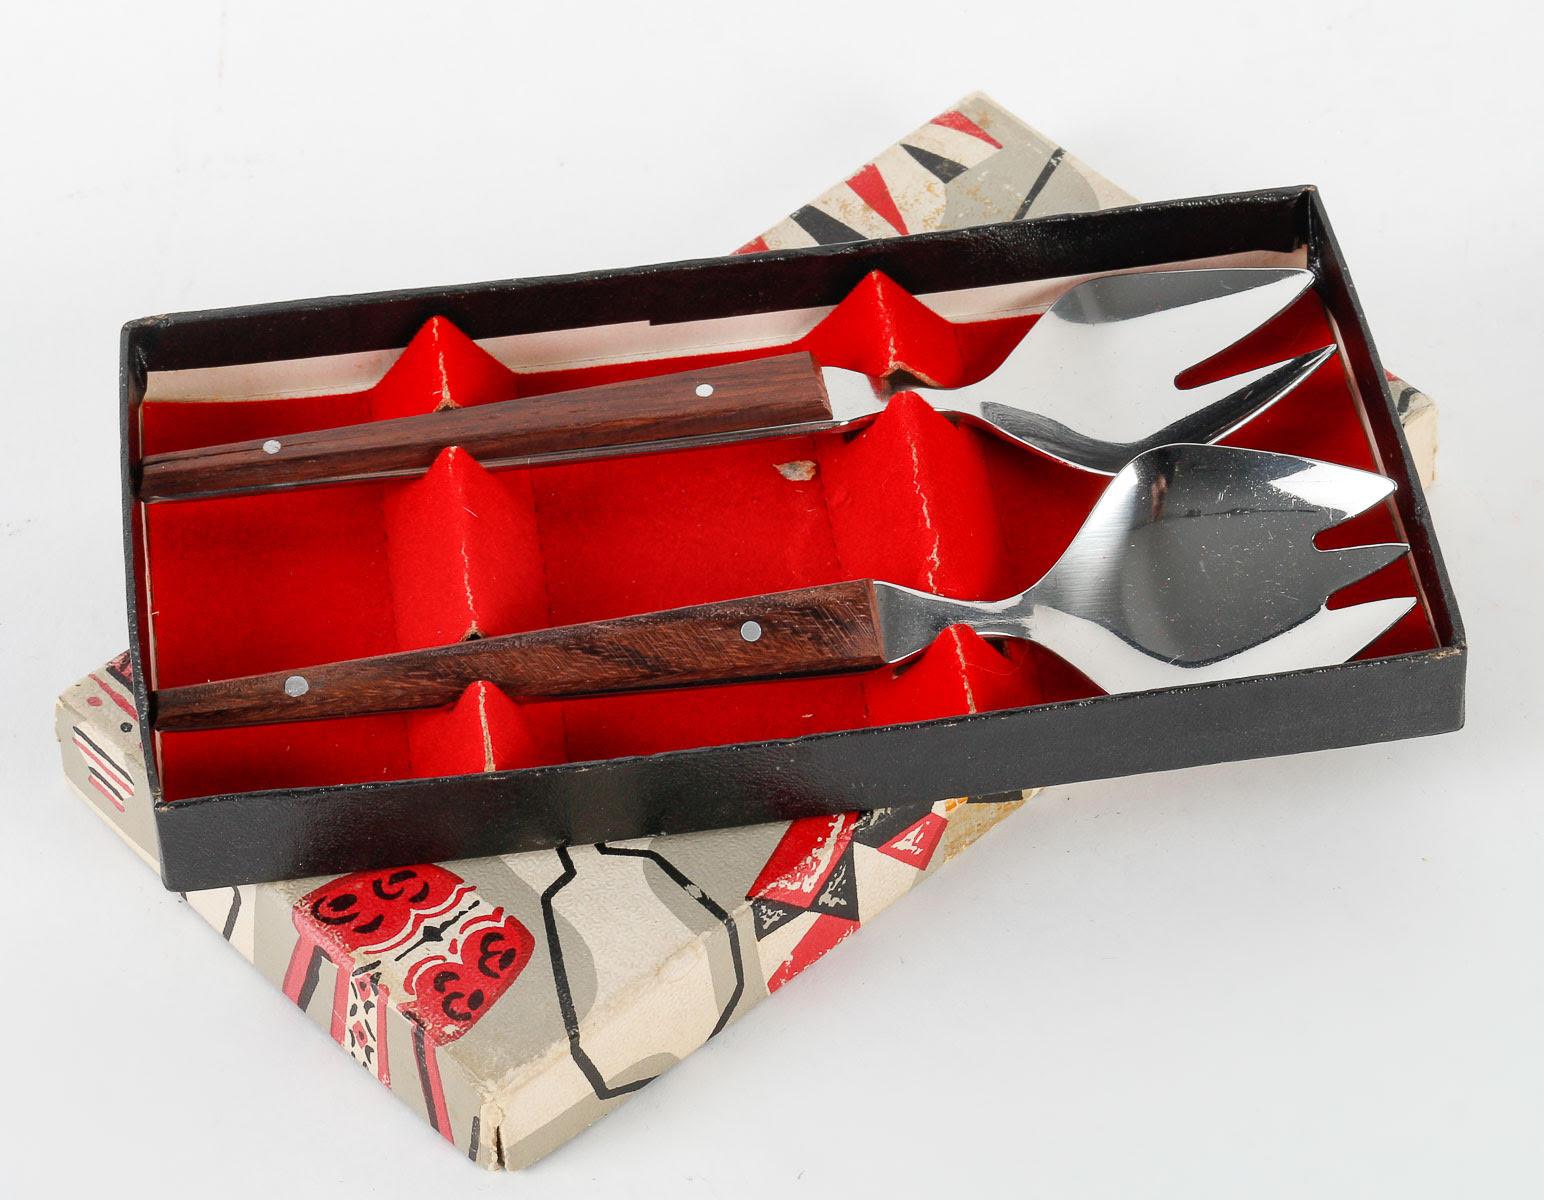 1960s cutlery sets.

Two pieces of 1960s cutlery in a metal and wood box, perfect for a baby.  
H: 1.5cm, W: 16cm, D: 9cm